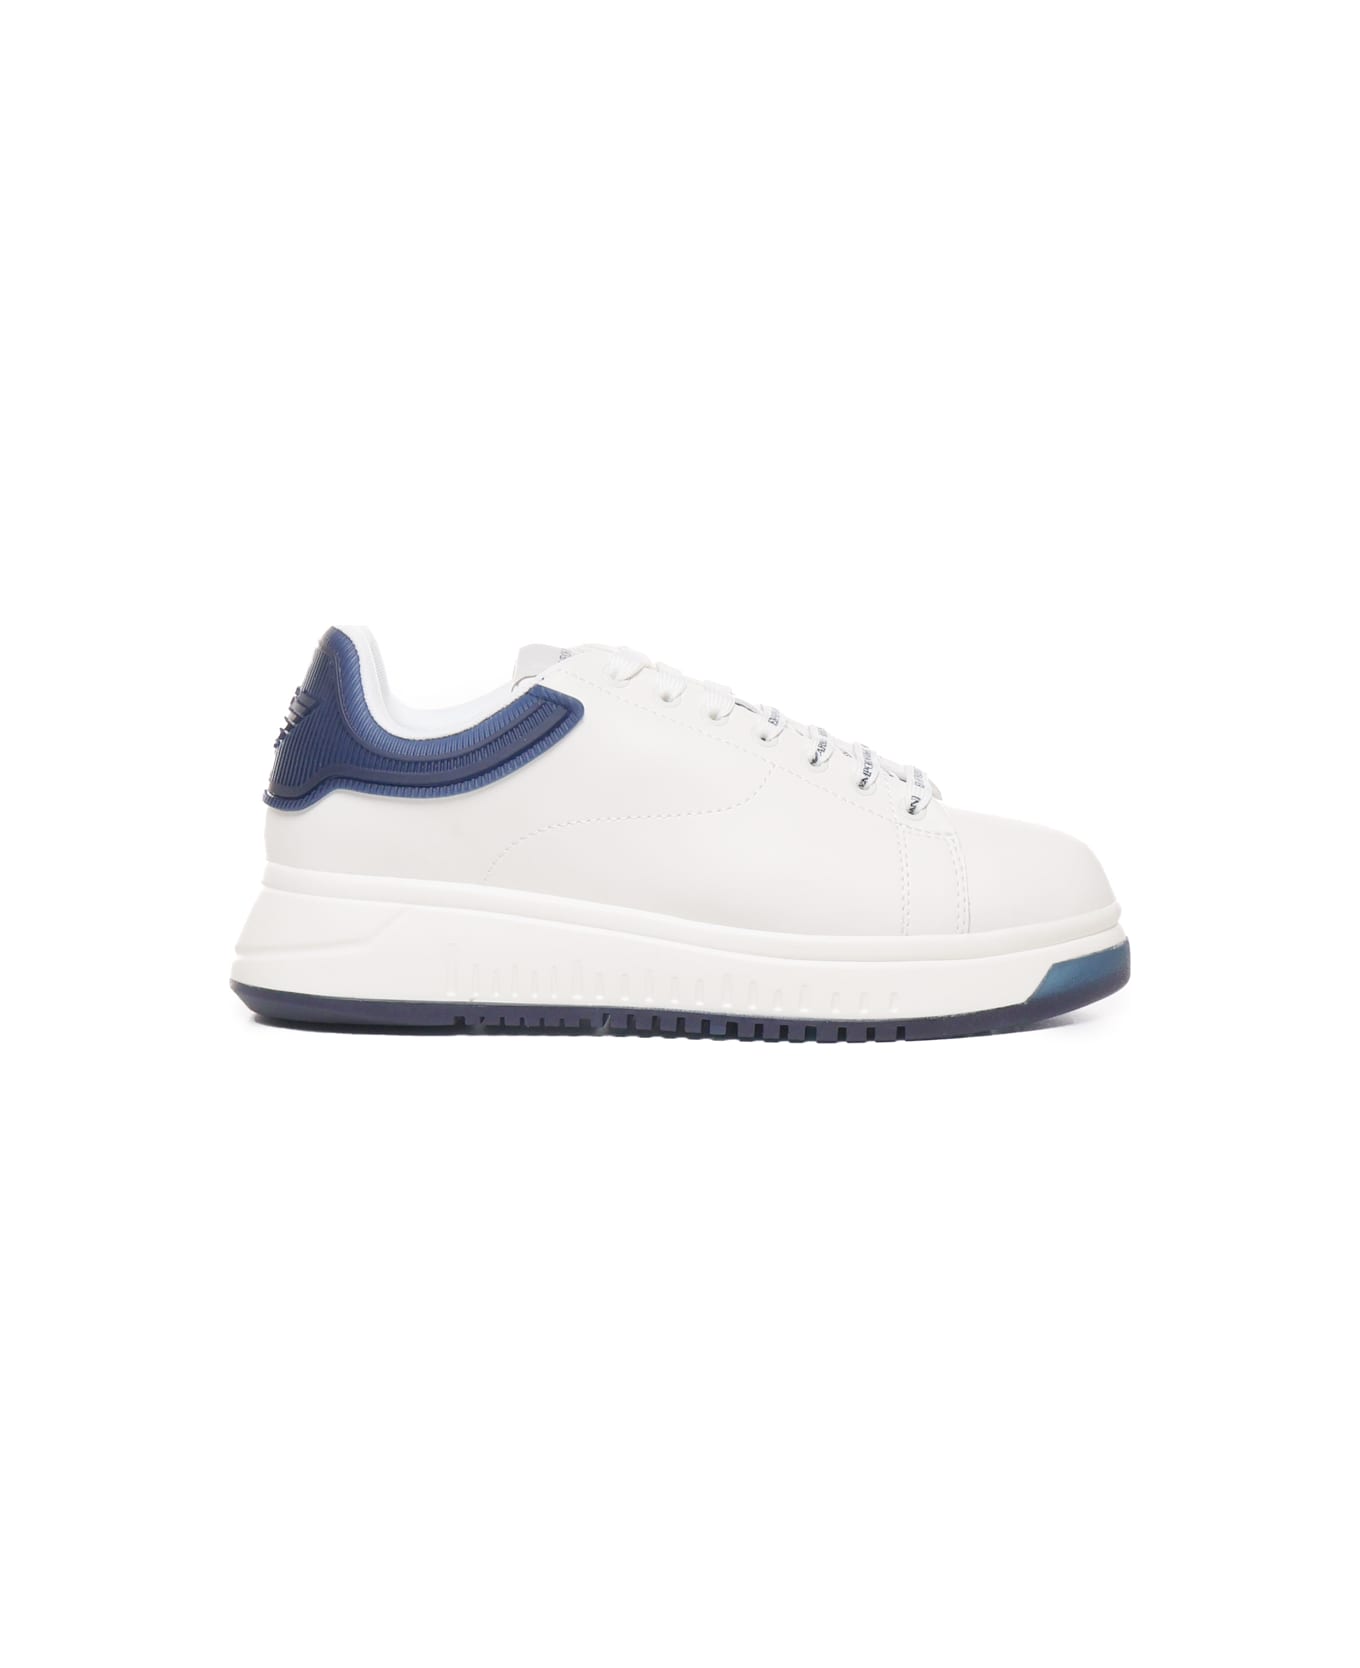 Emporio Armani Sneakers With Contrasting Rivet - Blue スニーカー